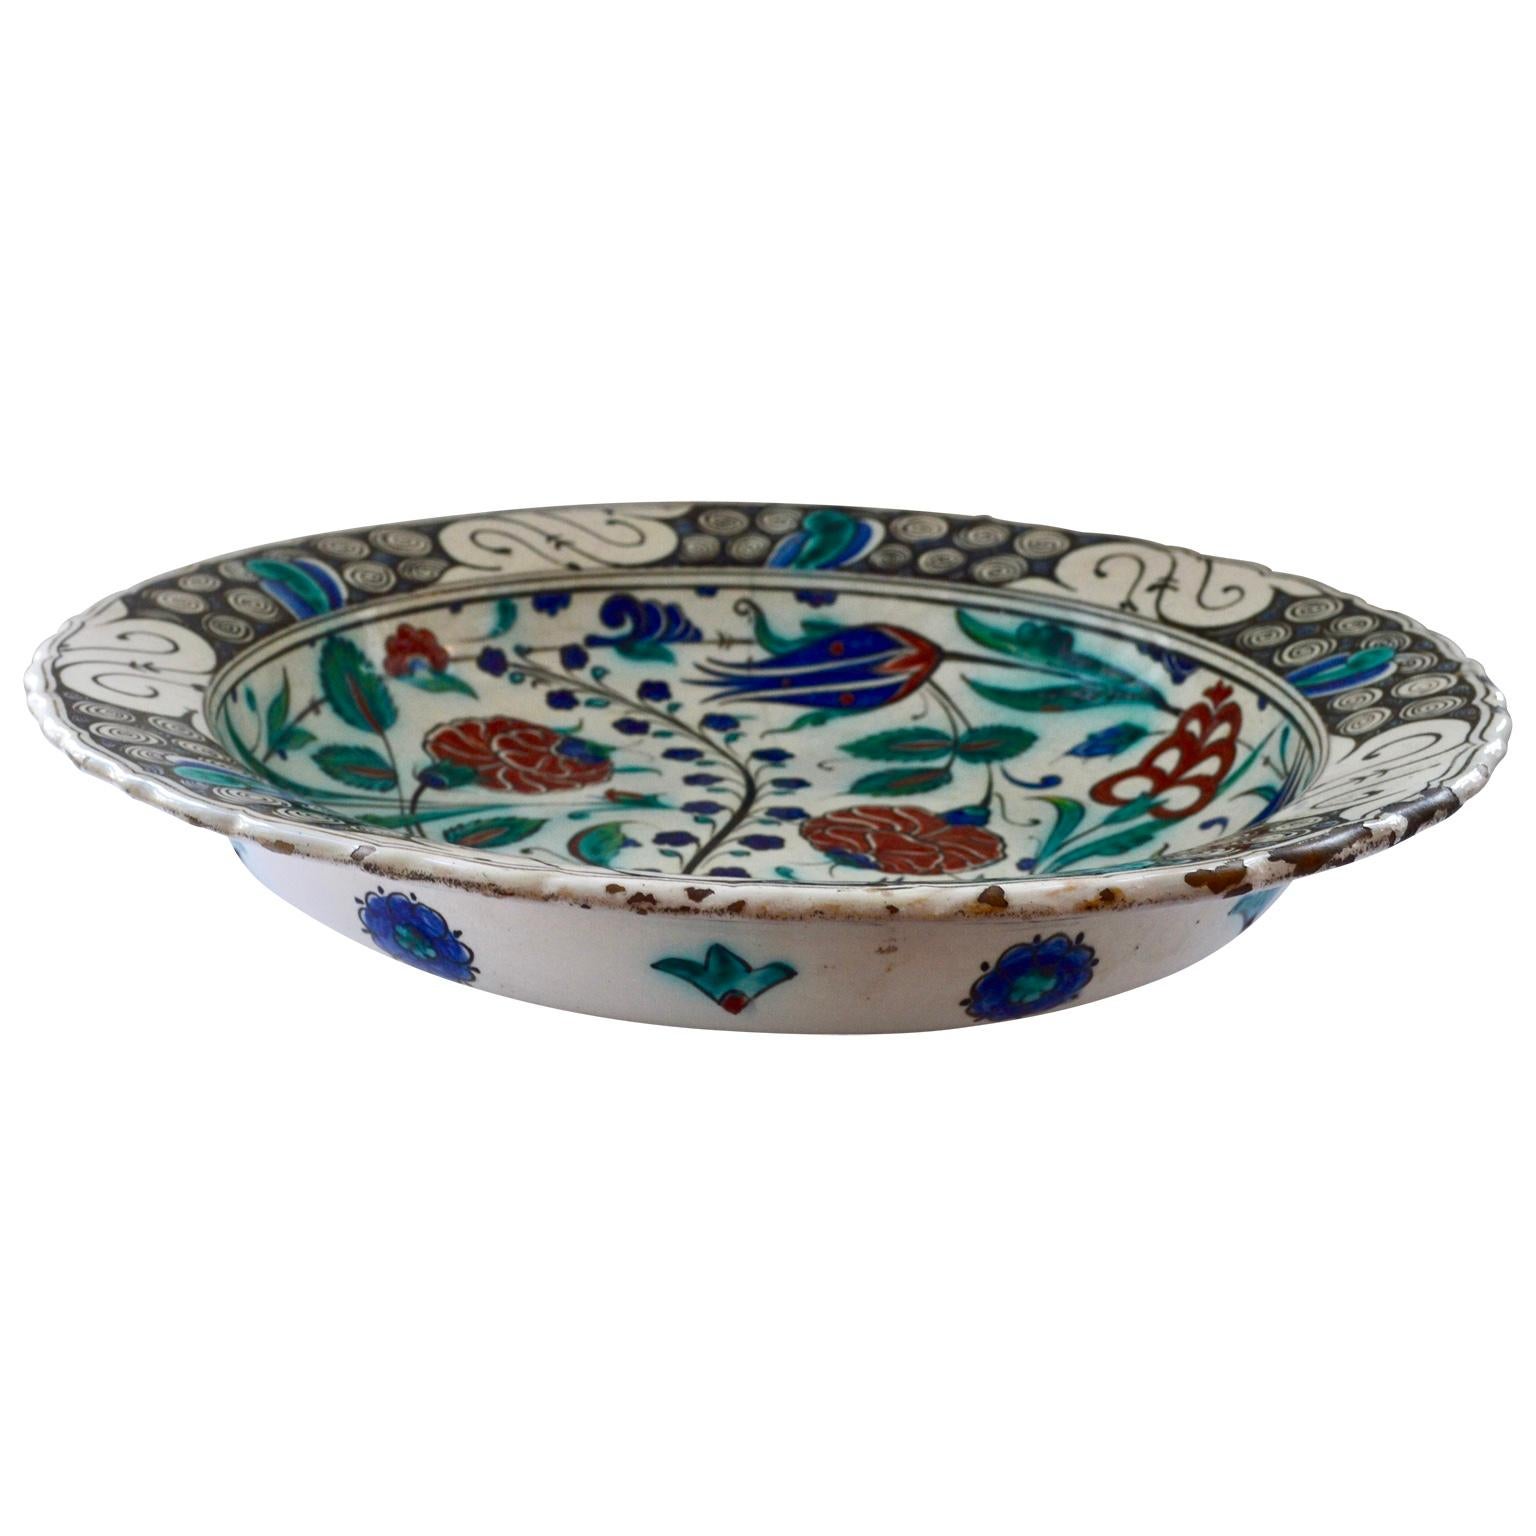 Hand-Crafted Large 19th Century Italian Iznik Style Faience Charger, Cantagalli, Florence